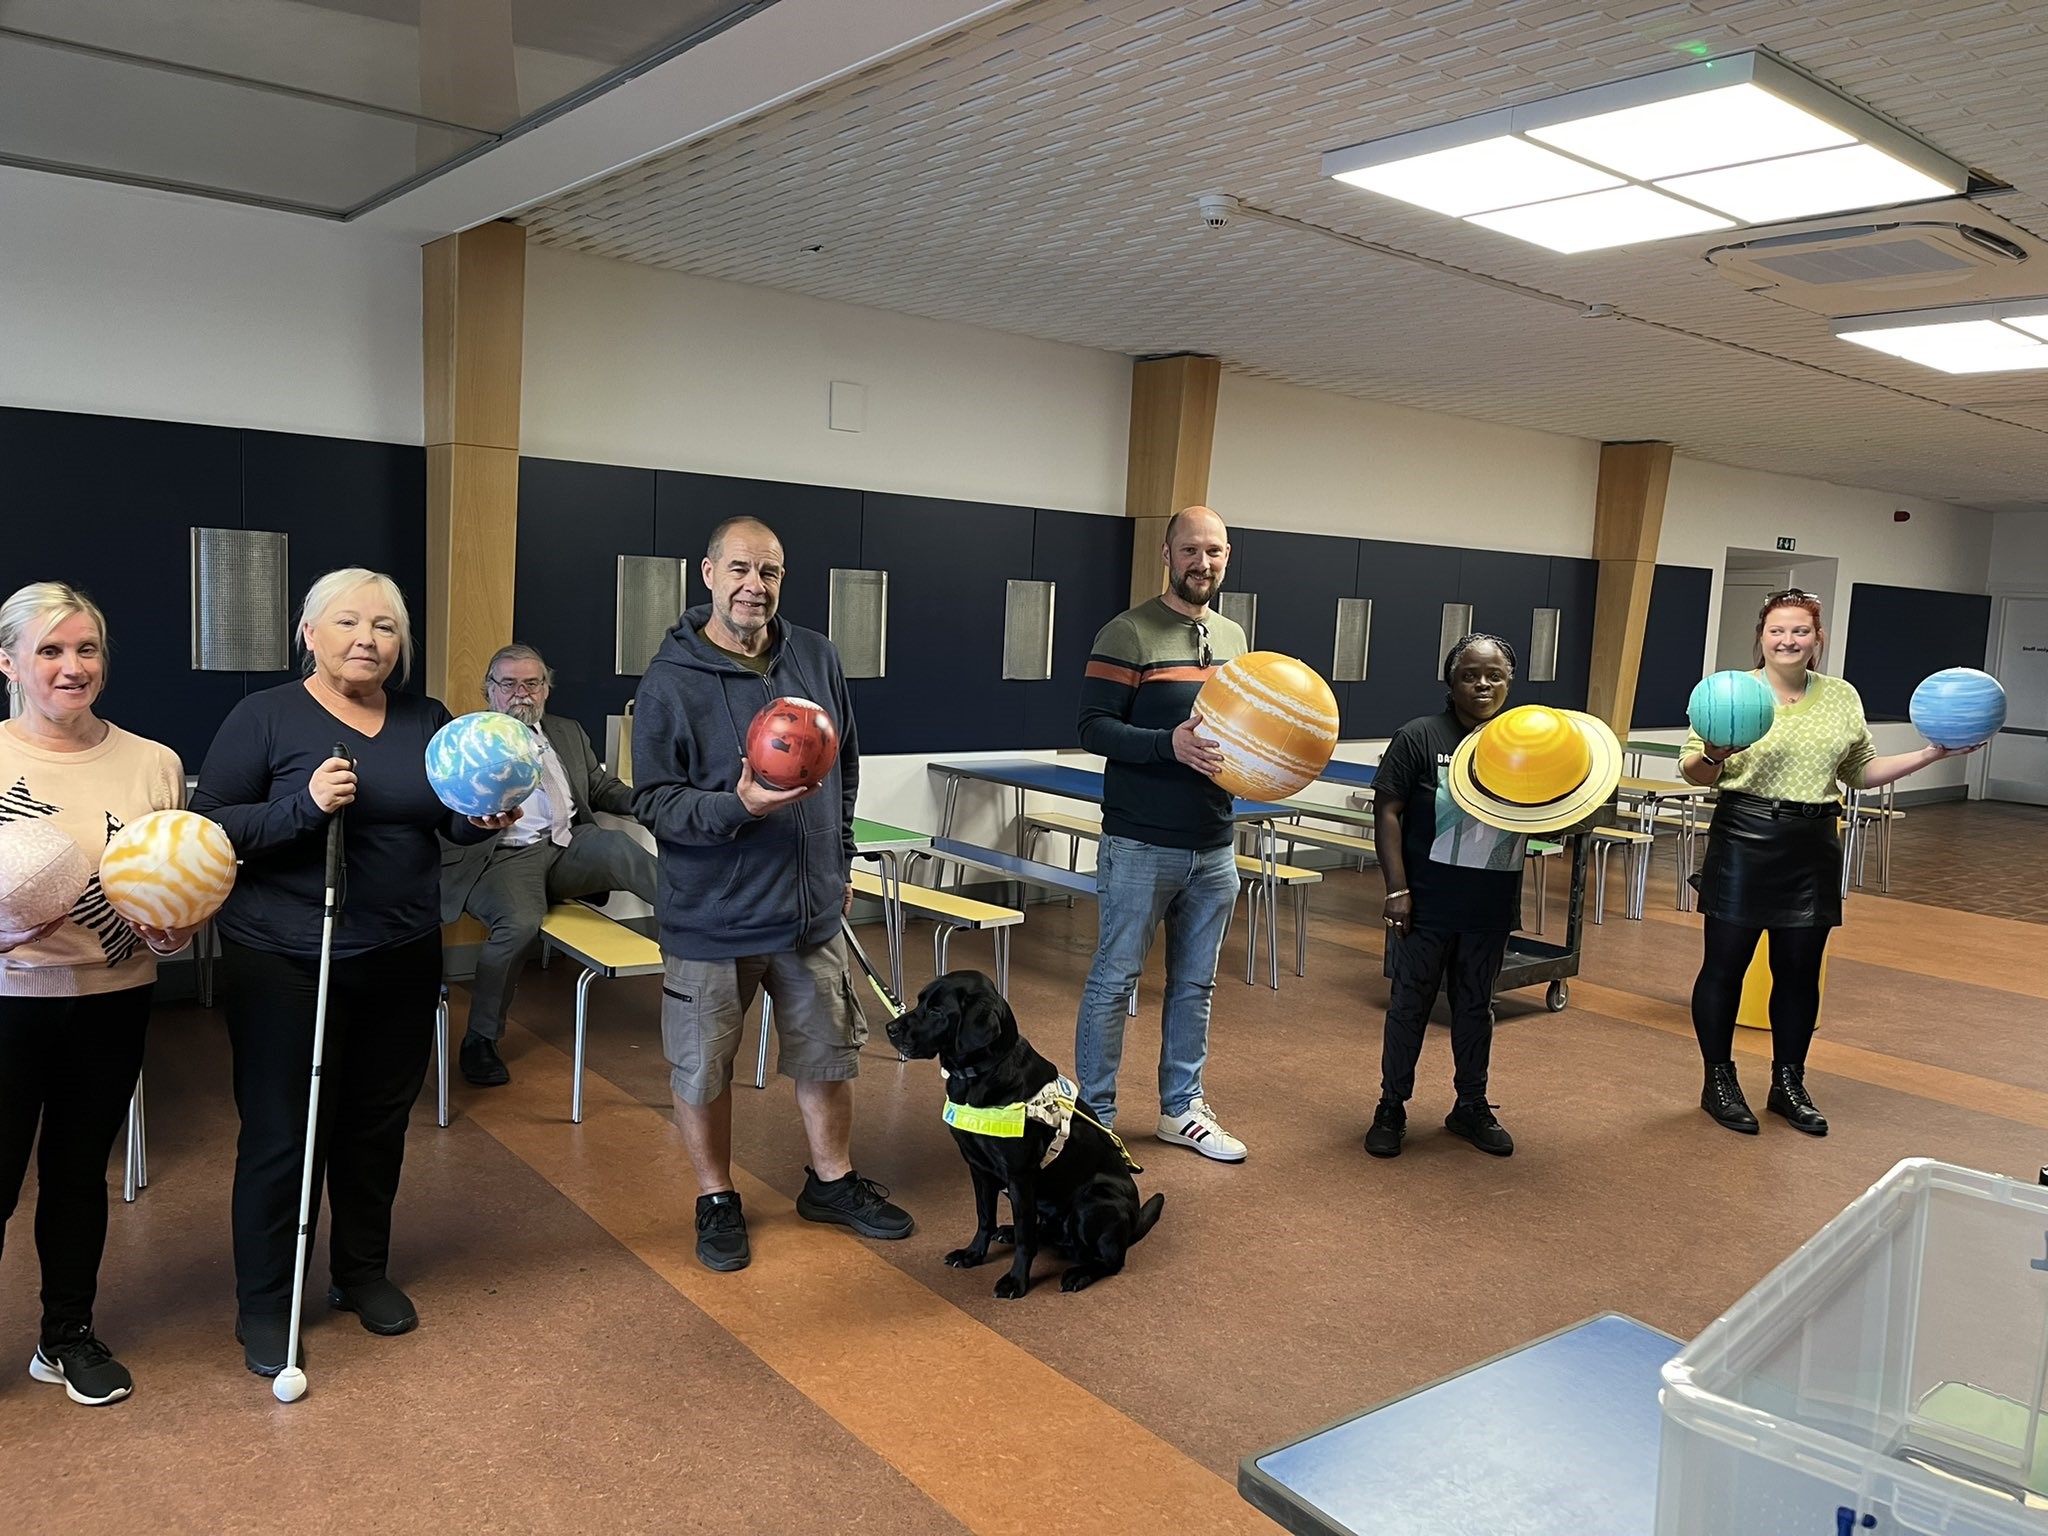 Merseyside SLC members standing in a line, each holding a model planet. From left to right: Kelly Barton, Norma Williams, Mick Spriggs, and Naomi Ditchfield. Megan and another staff member are also shown in the photo holding planets.